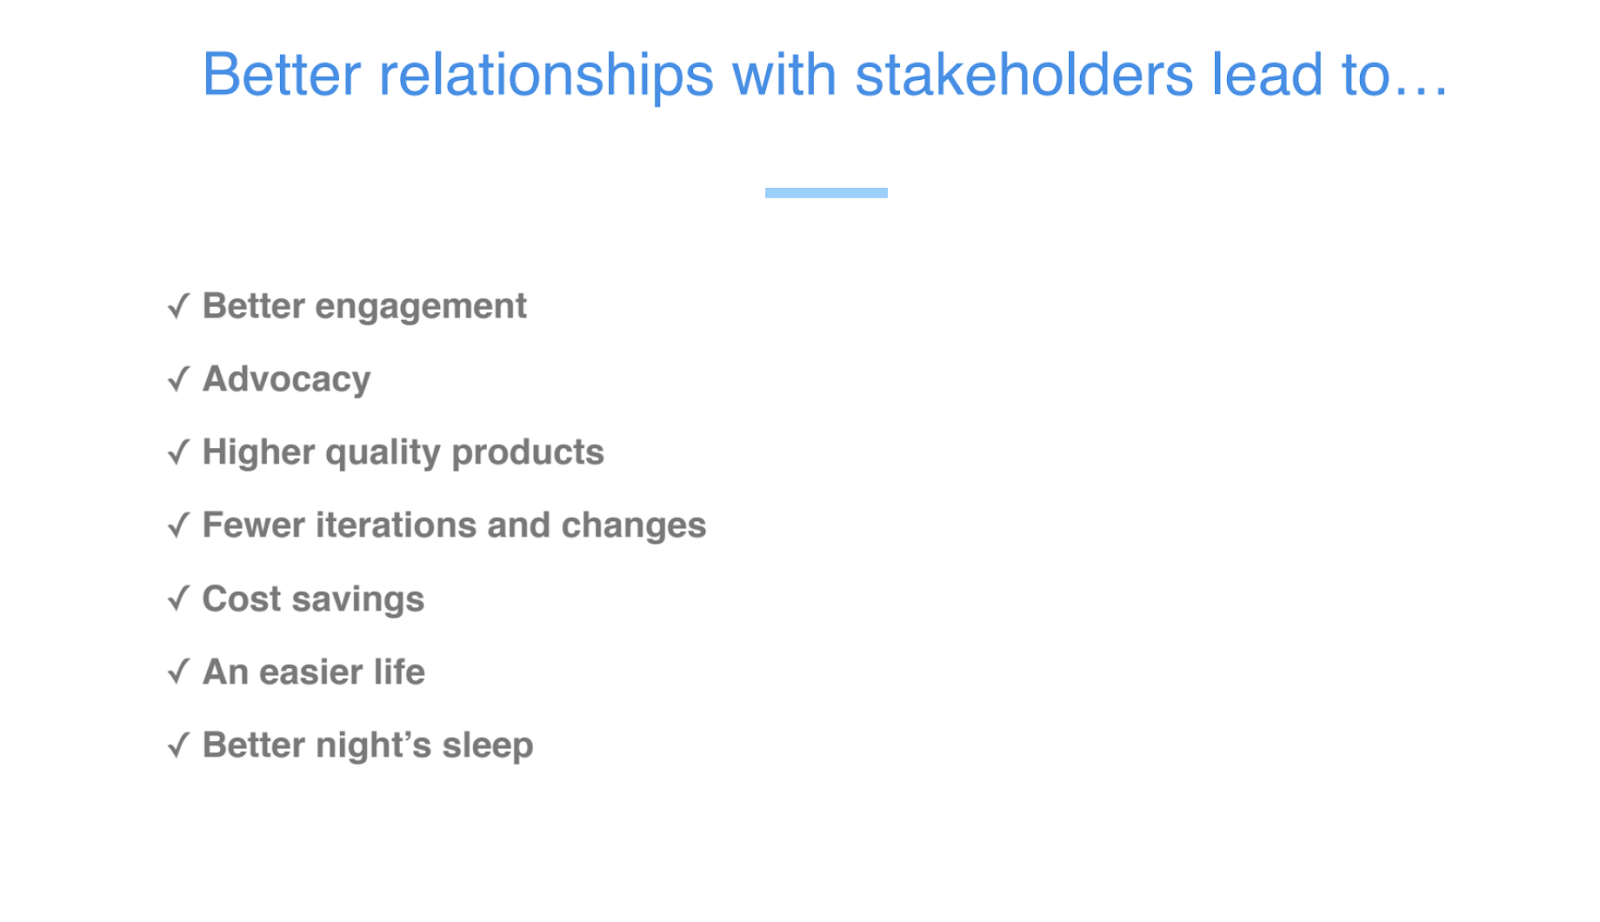 Stakeholder relationship outcomes